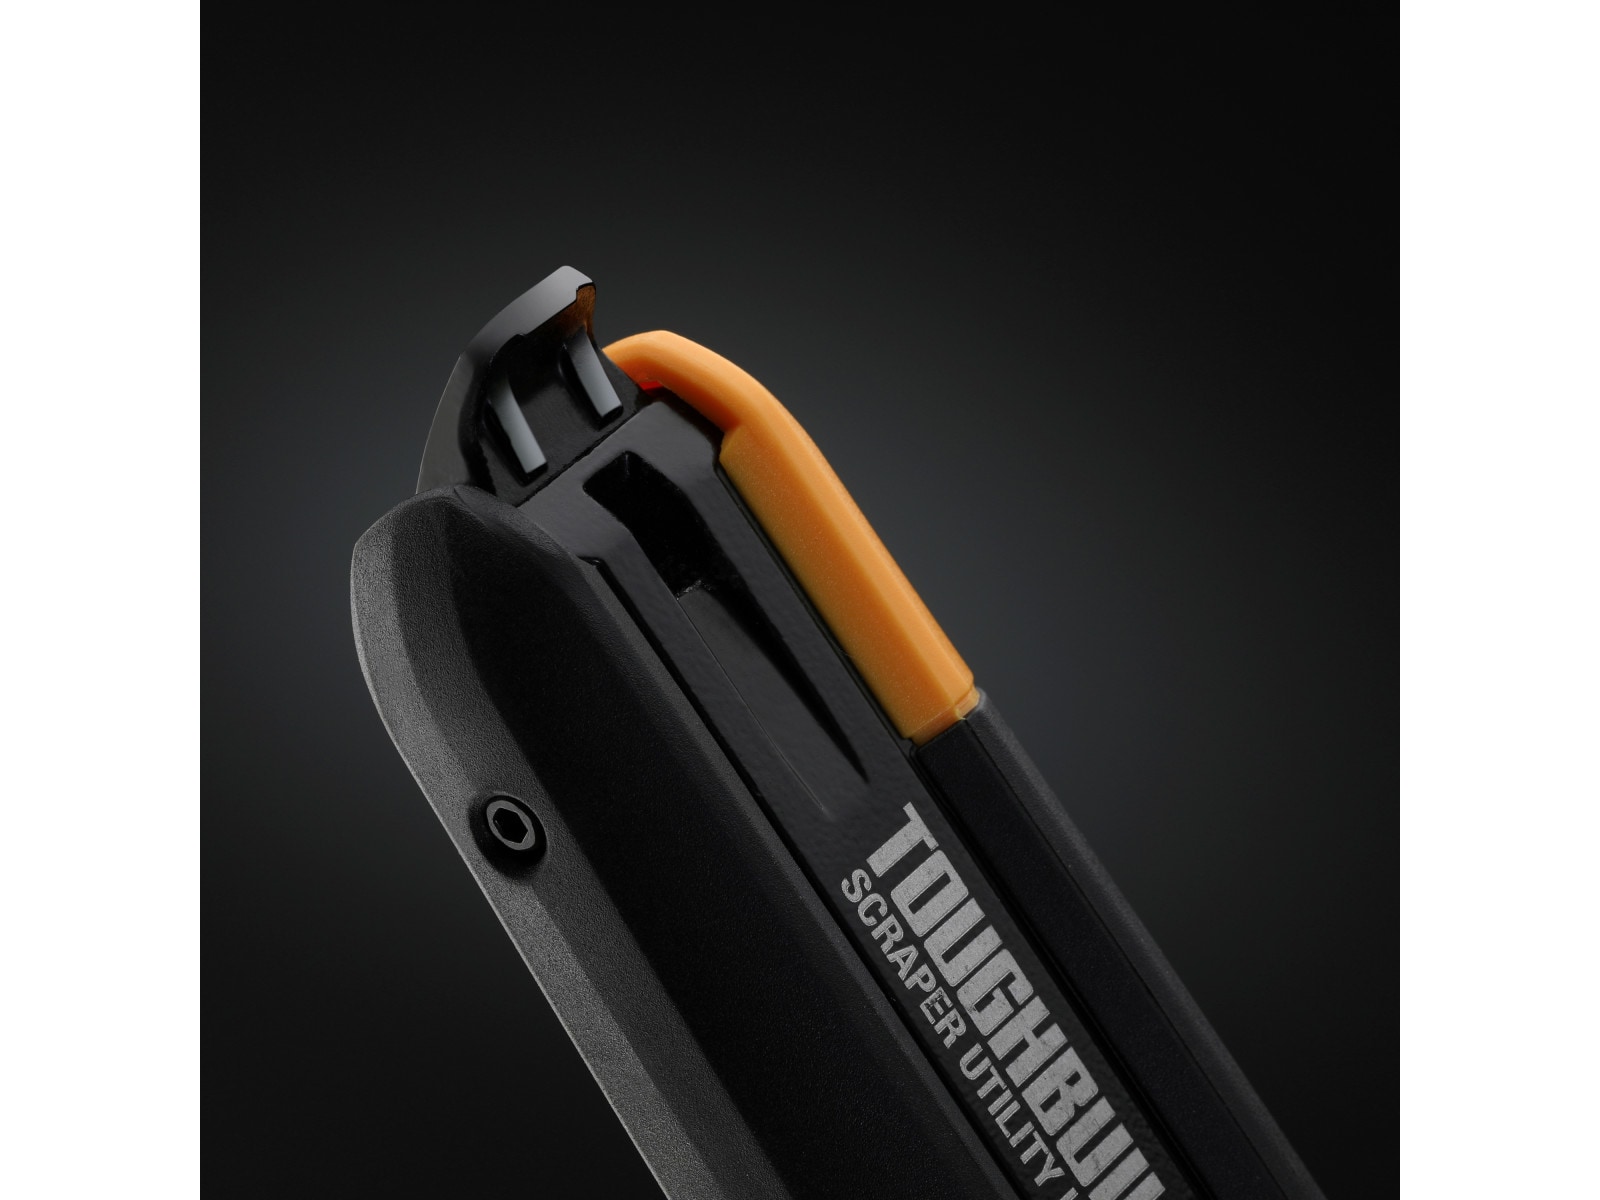 TOUGHBUILT INDUSTRIES LAUNCHES NEW PRODUCT TWO-IN-ONE SCRAPER AND UTILITY  KNIFE — ToughBuilt Industries, Inc. (TBLT)